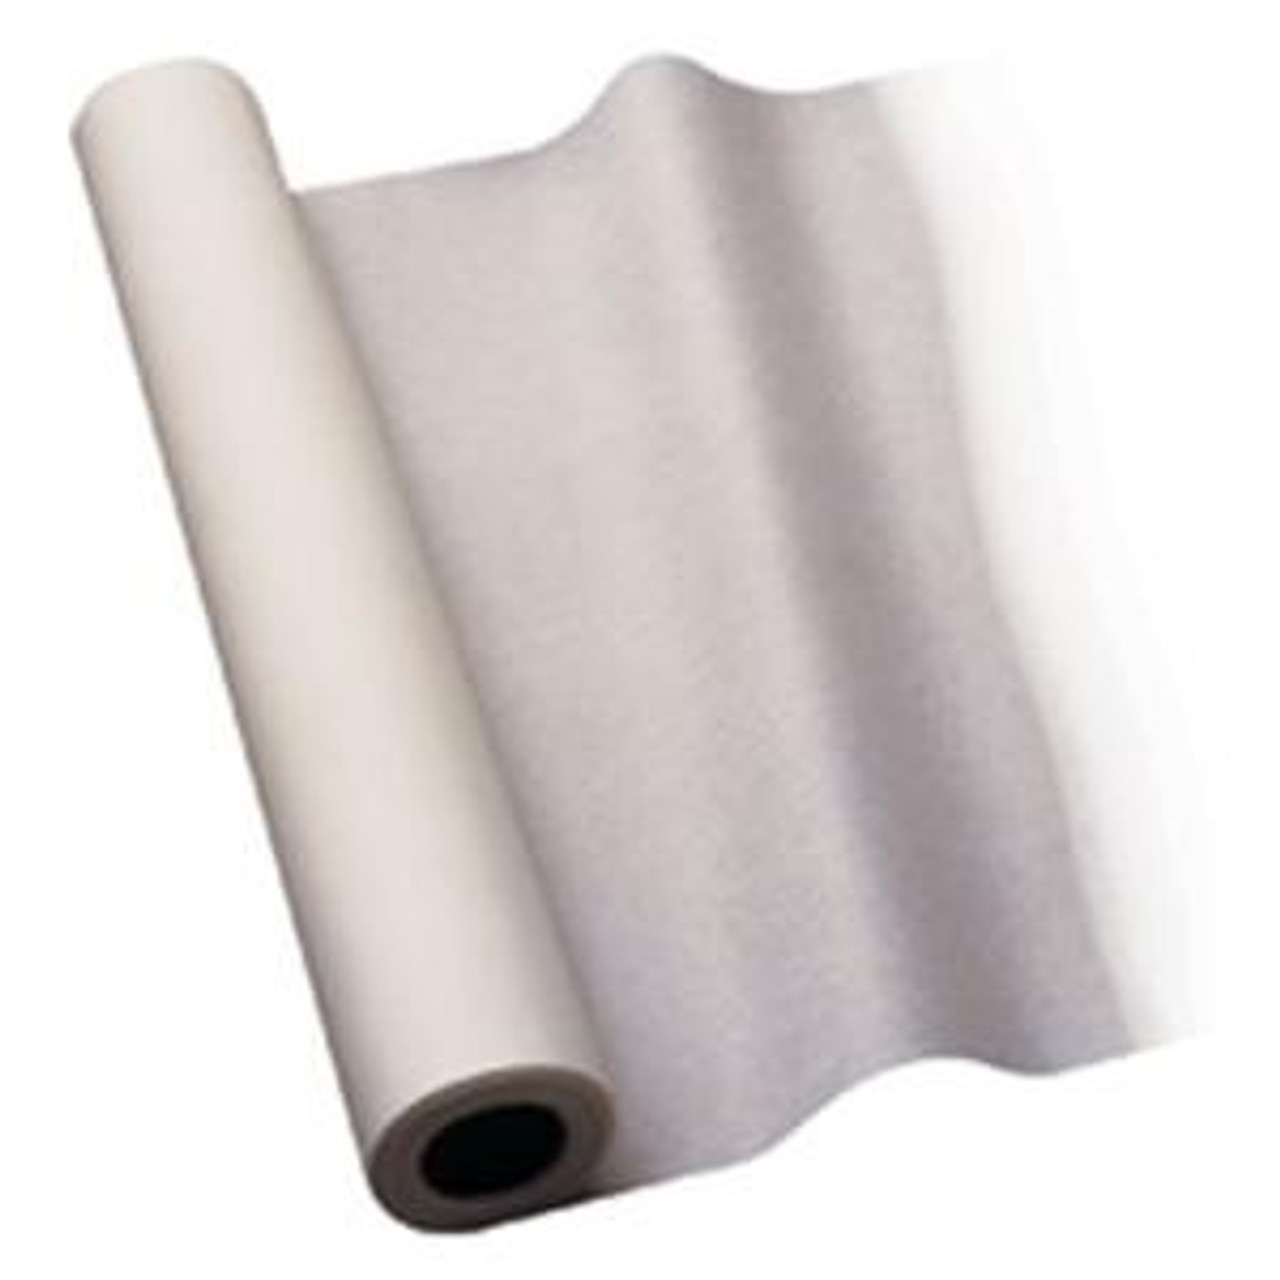 EXAMINATION TABLE PAPER 21X225 Ft 12 Rolls/BX